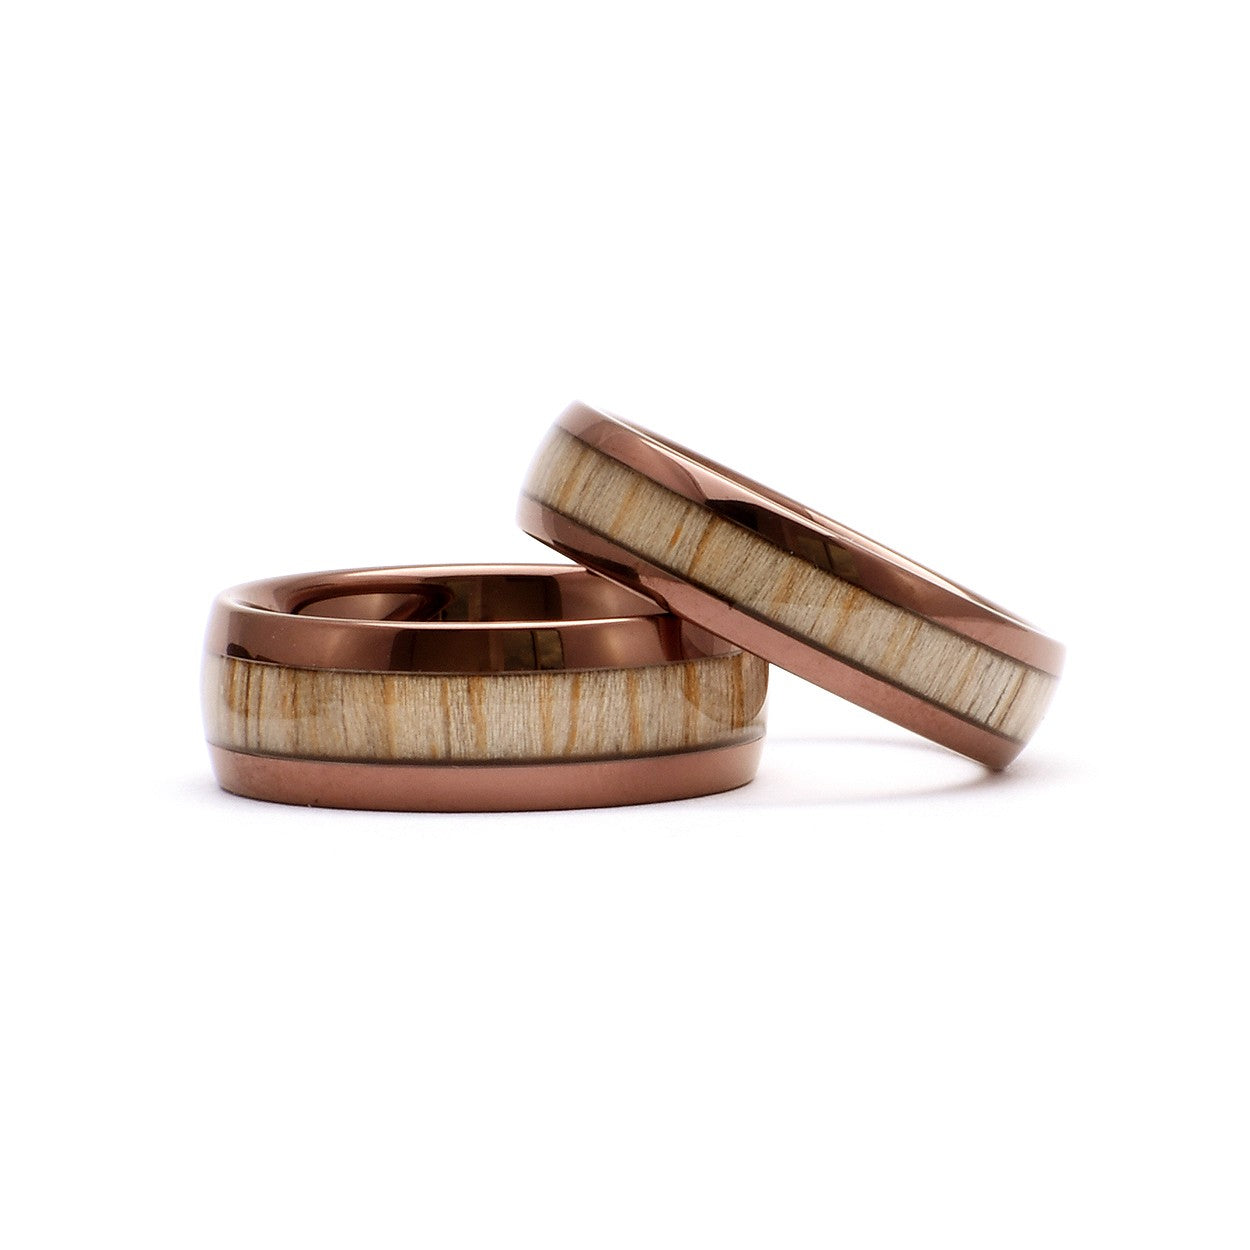 The Frank - Tungsten / Wood Men's Wedding Band Brown & Dome